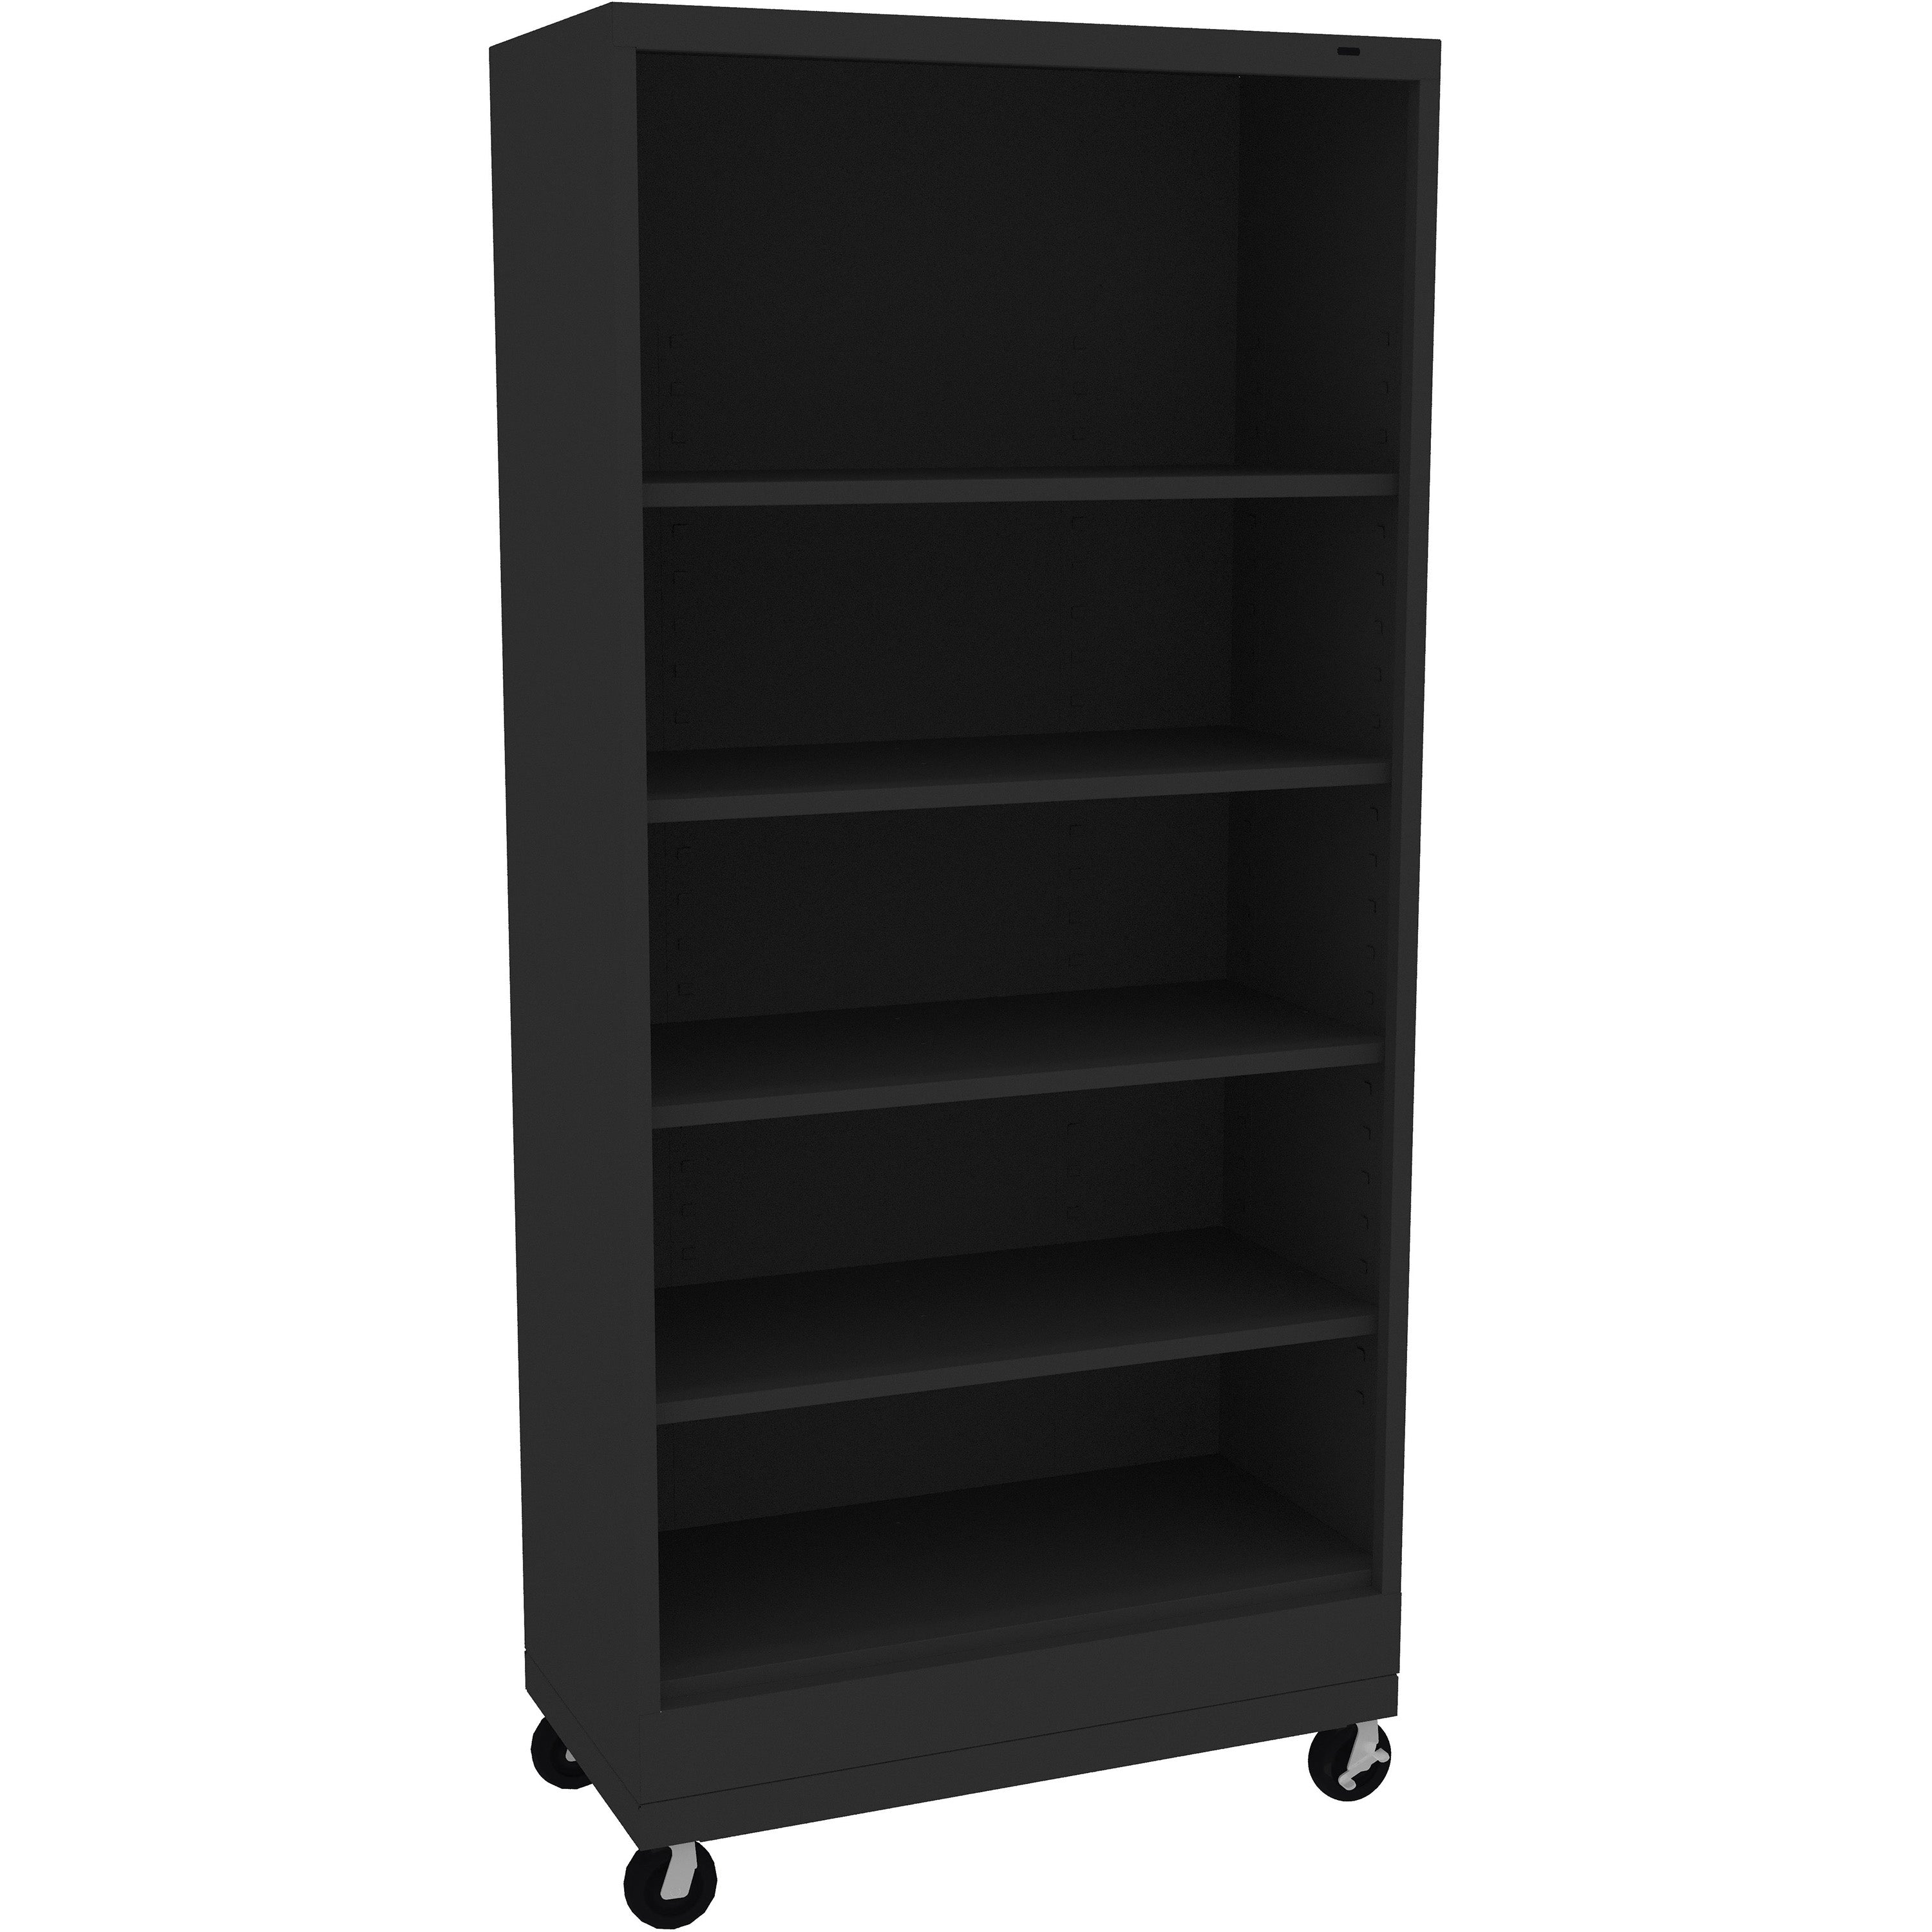 Tennsco 72" High Welded Bookcase with Casters - 18" Deep, BC18-72M